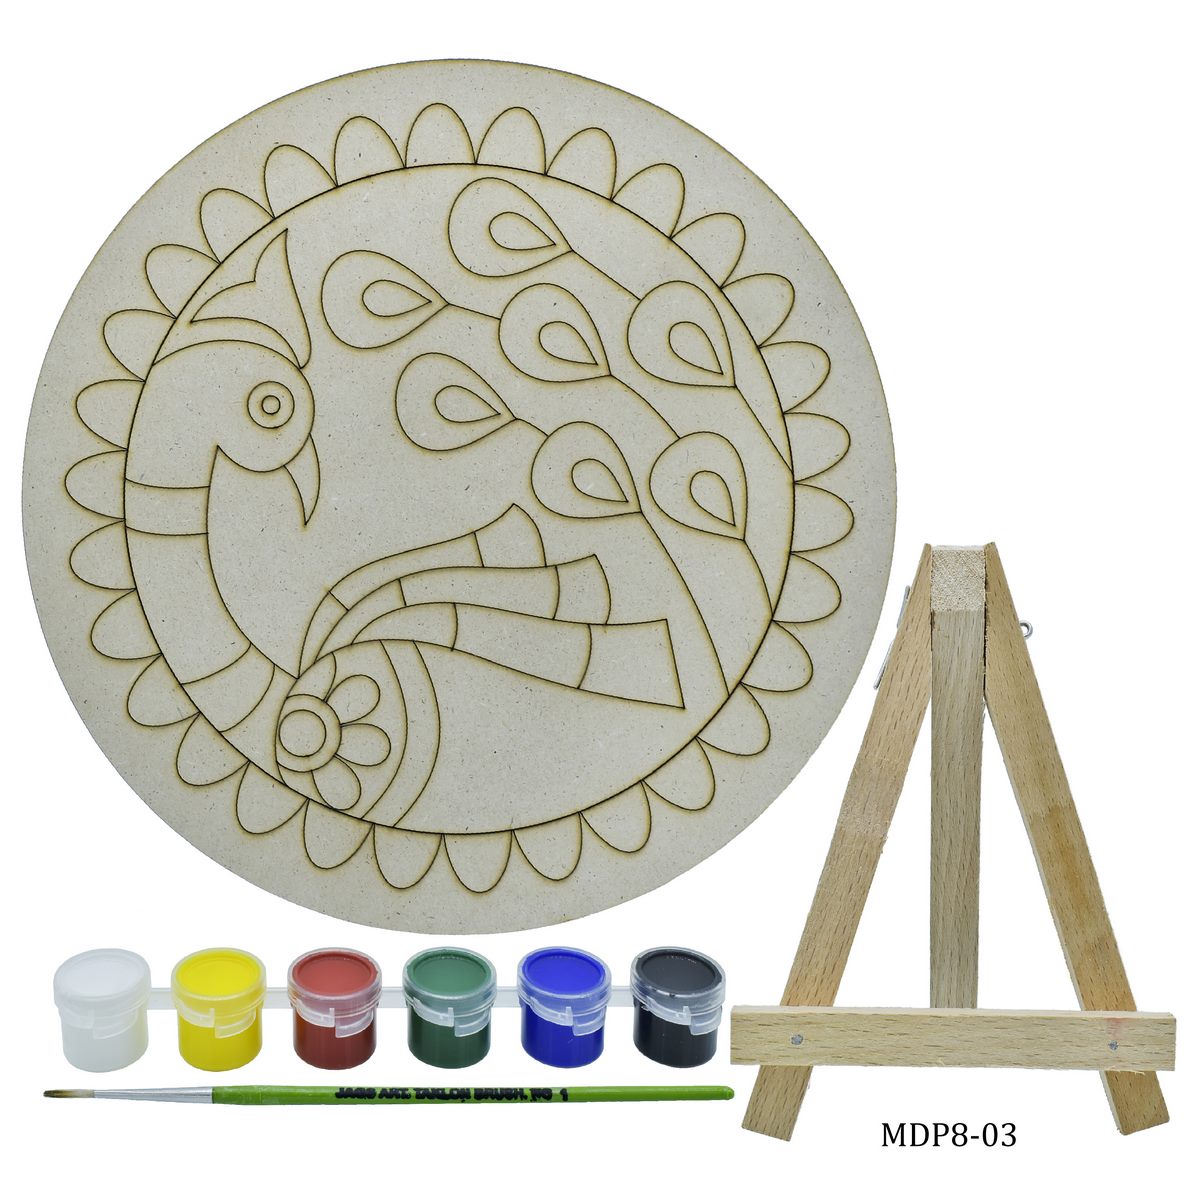 jags-mumbai MDF Pre-marked MDF Peacock Shapes Cutout with Feather for DIY Crafts, Pichwai painting